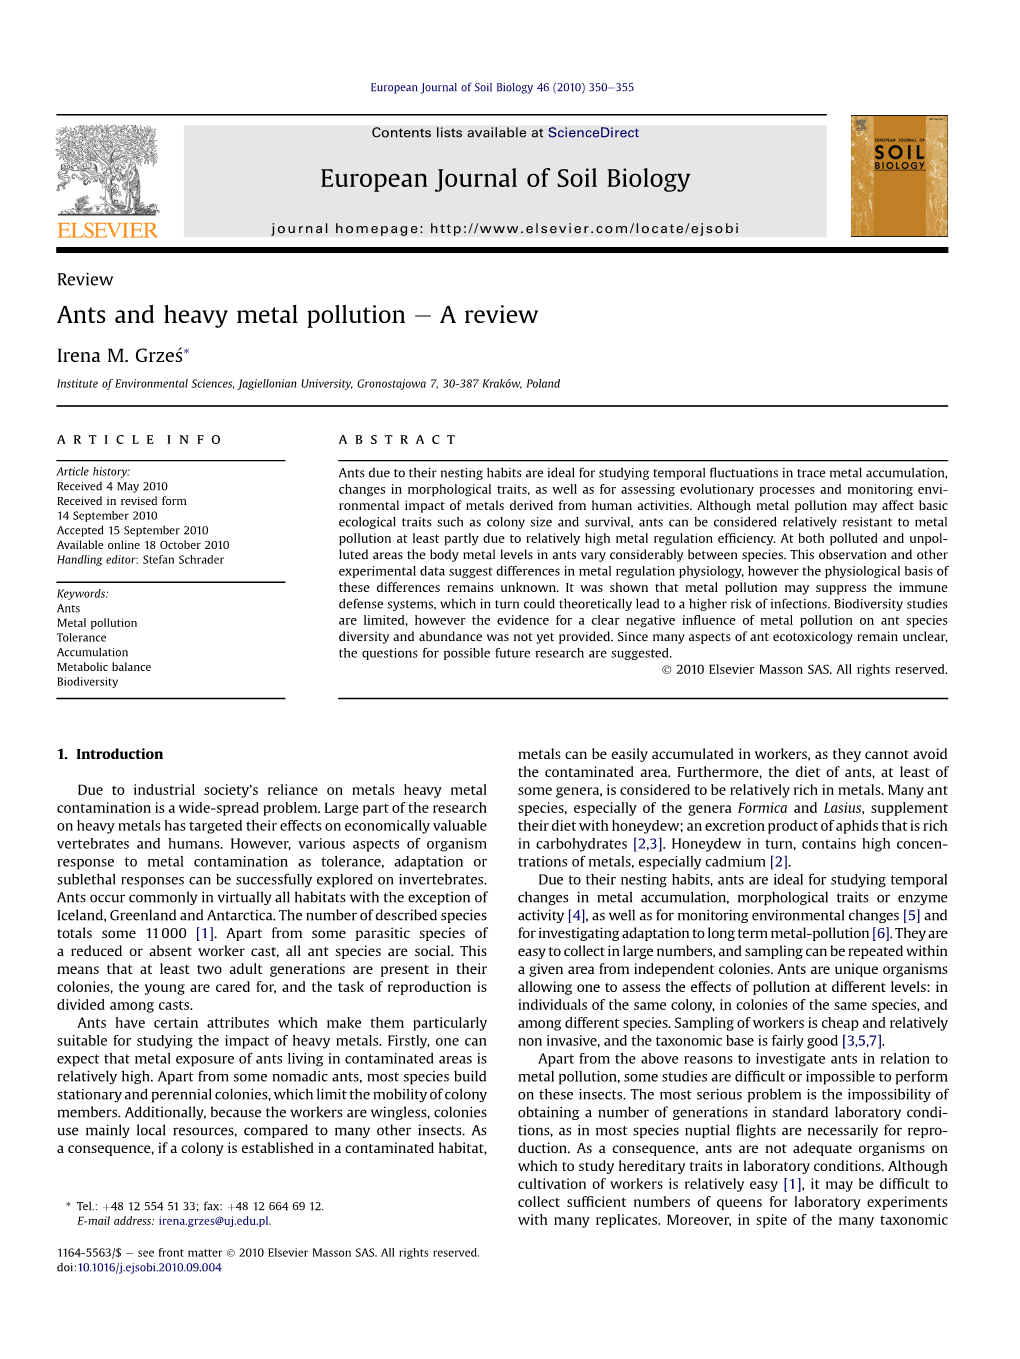 Ants and Heavy Metal Pollution E a Review